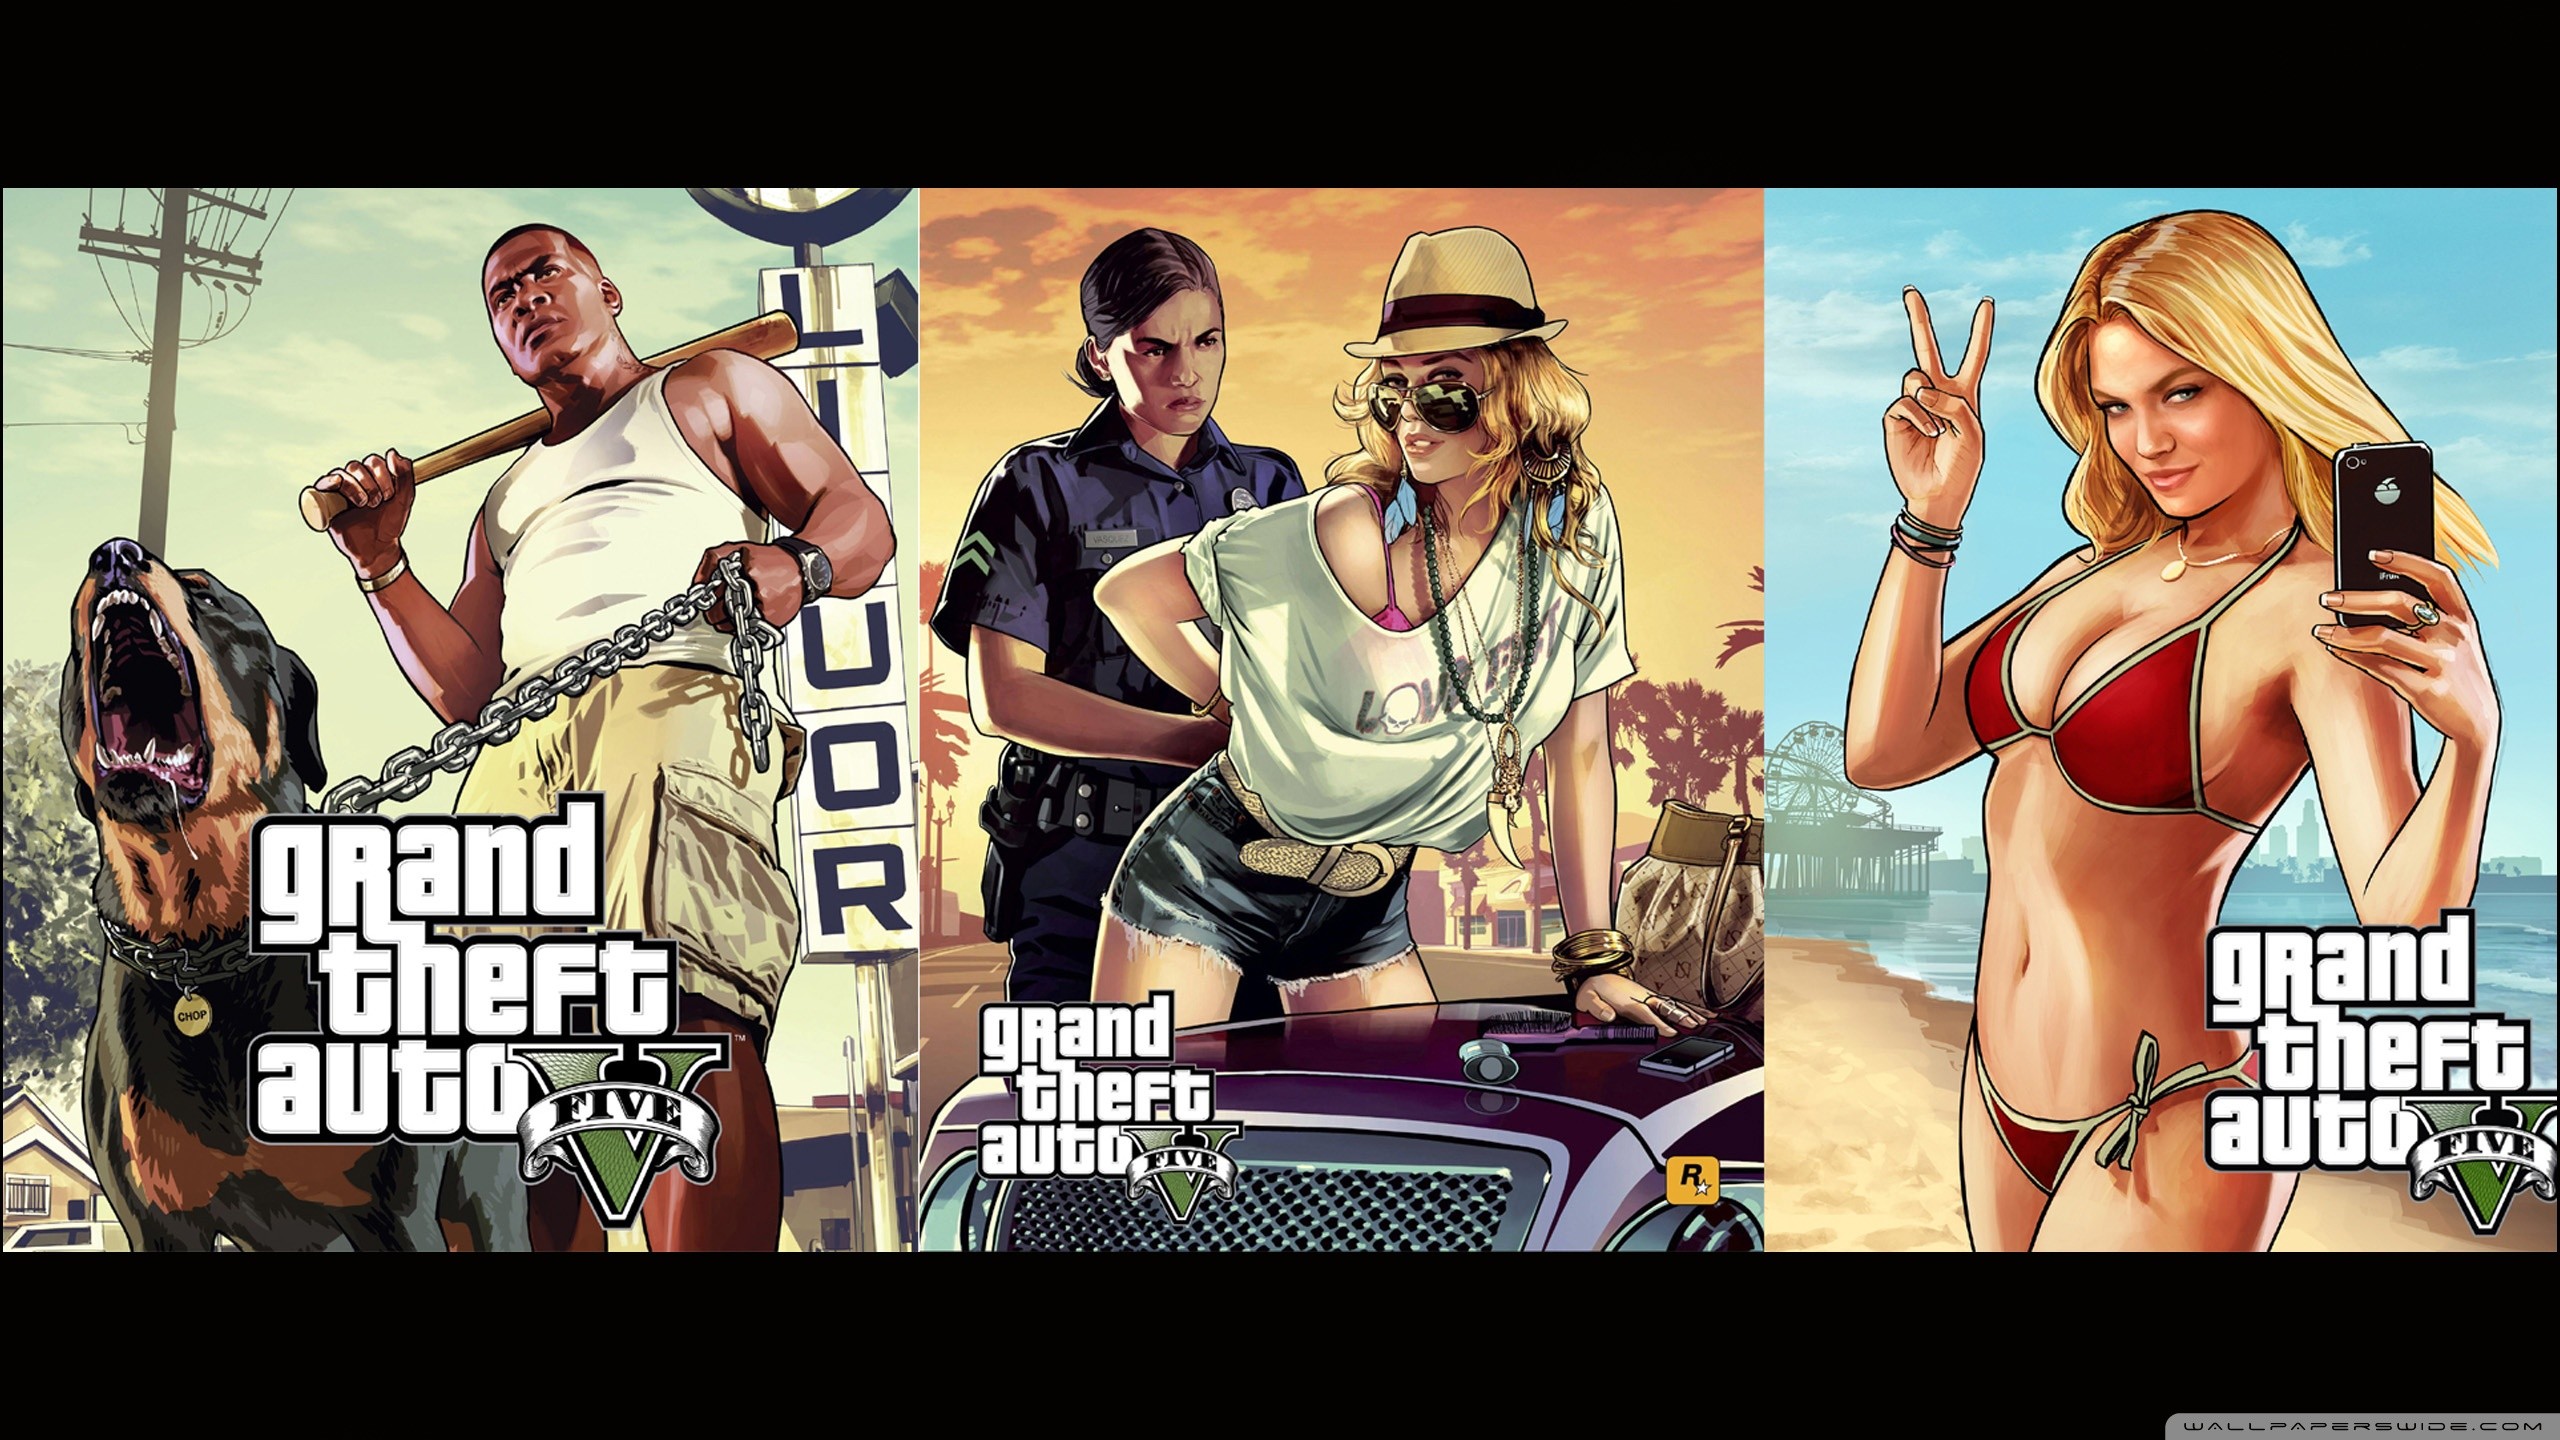 Gta 5 wallpapers for phone фото 15